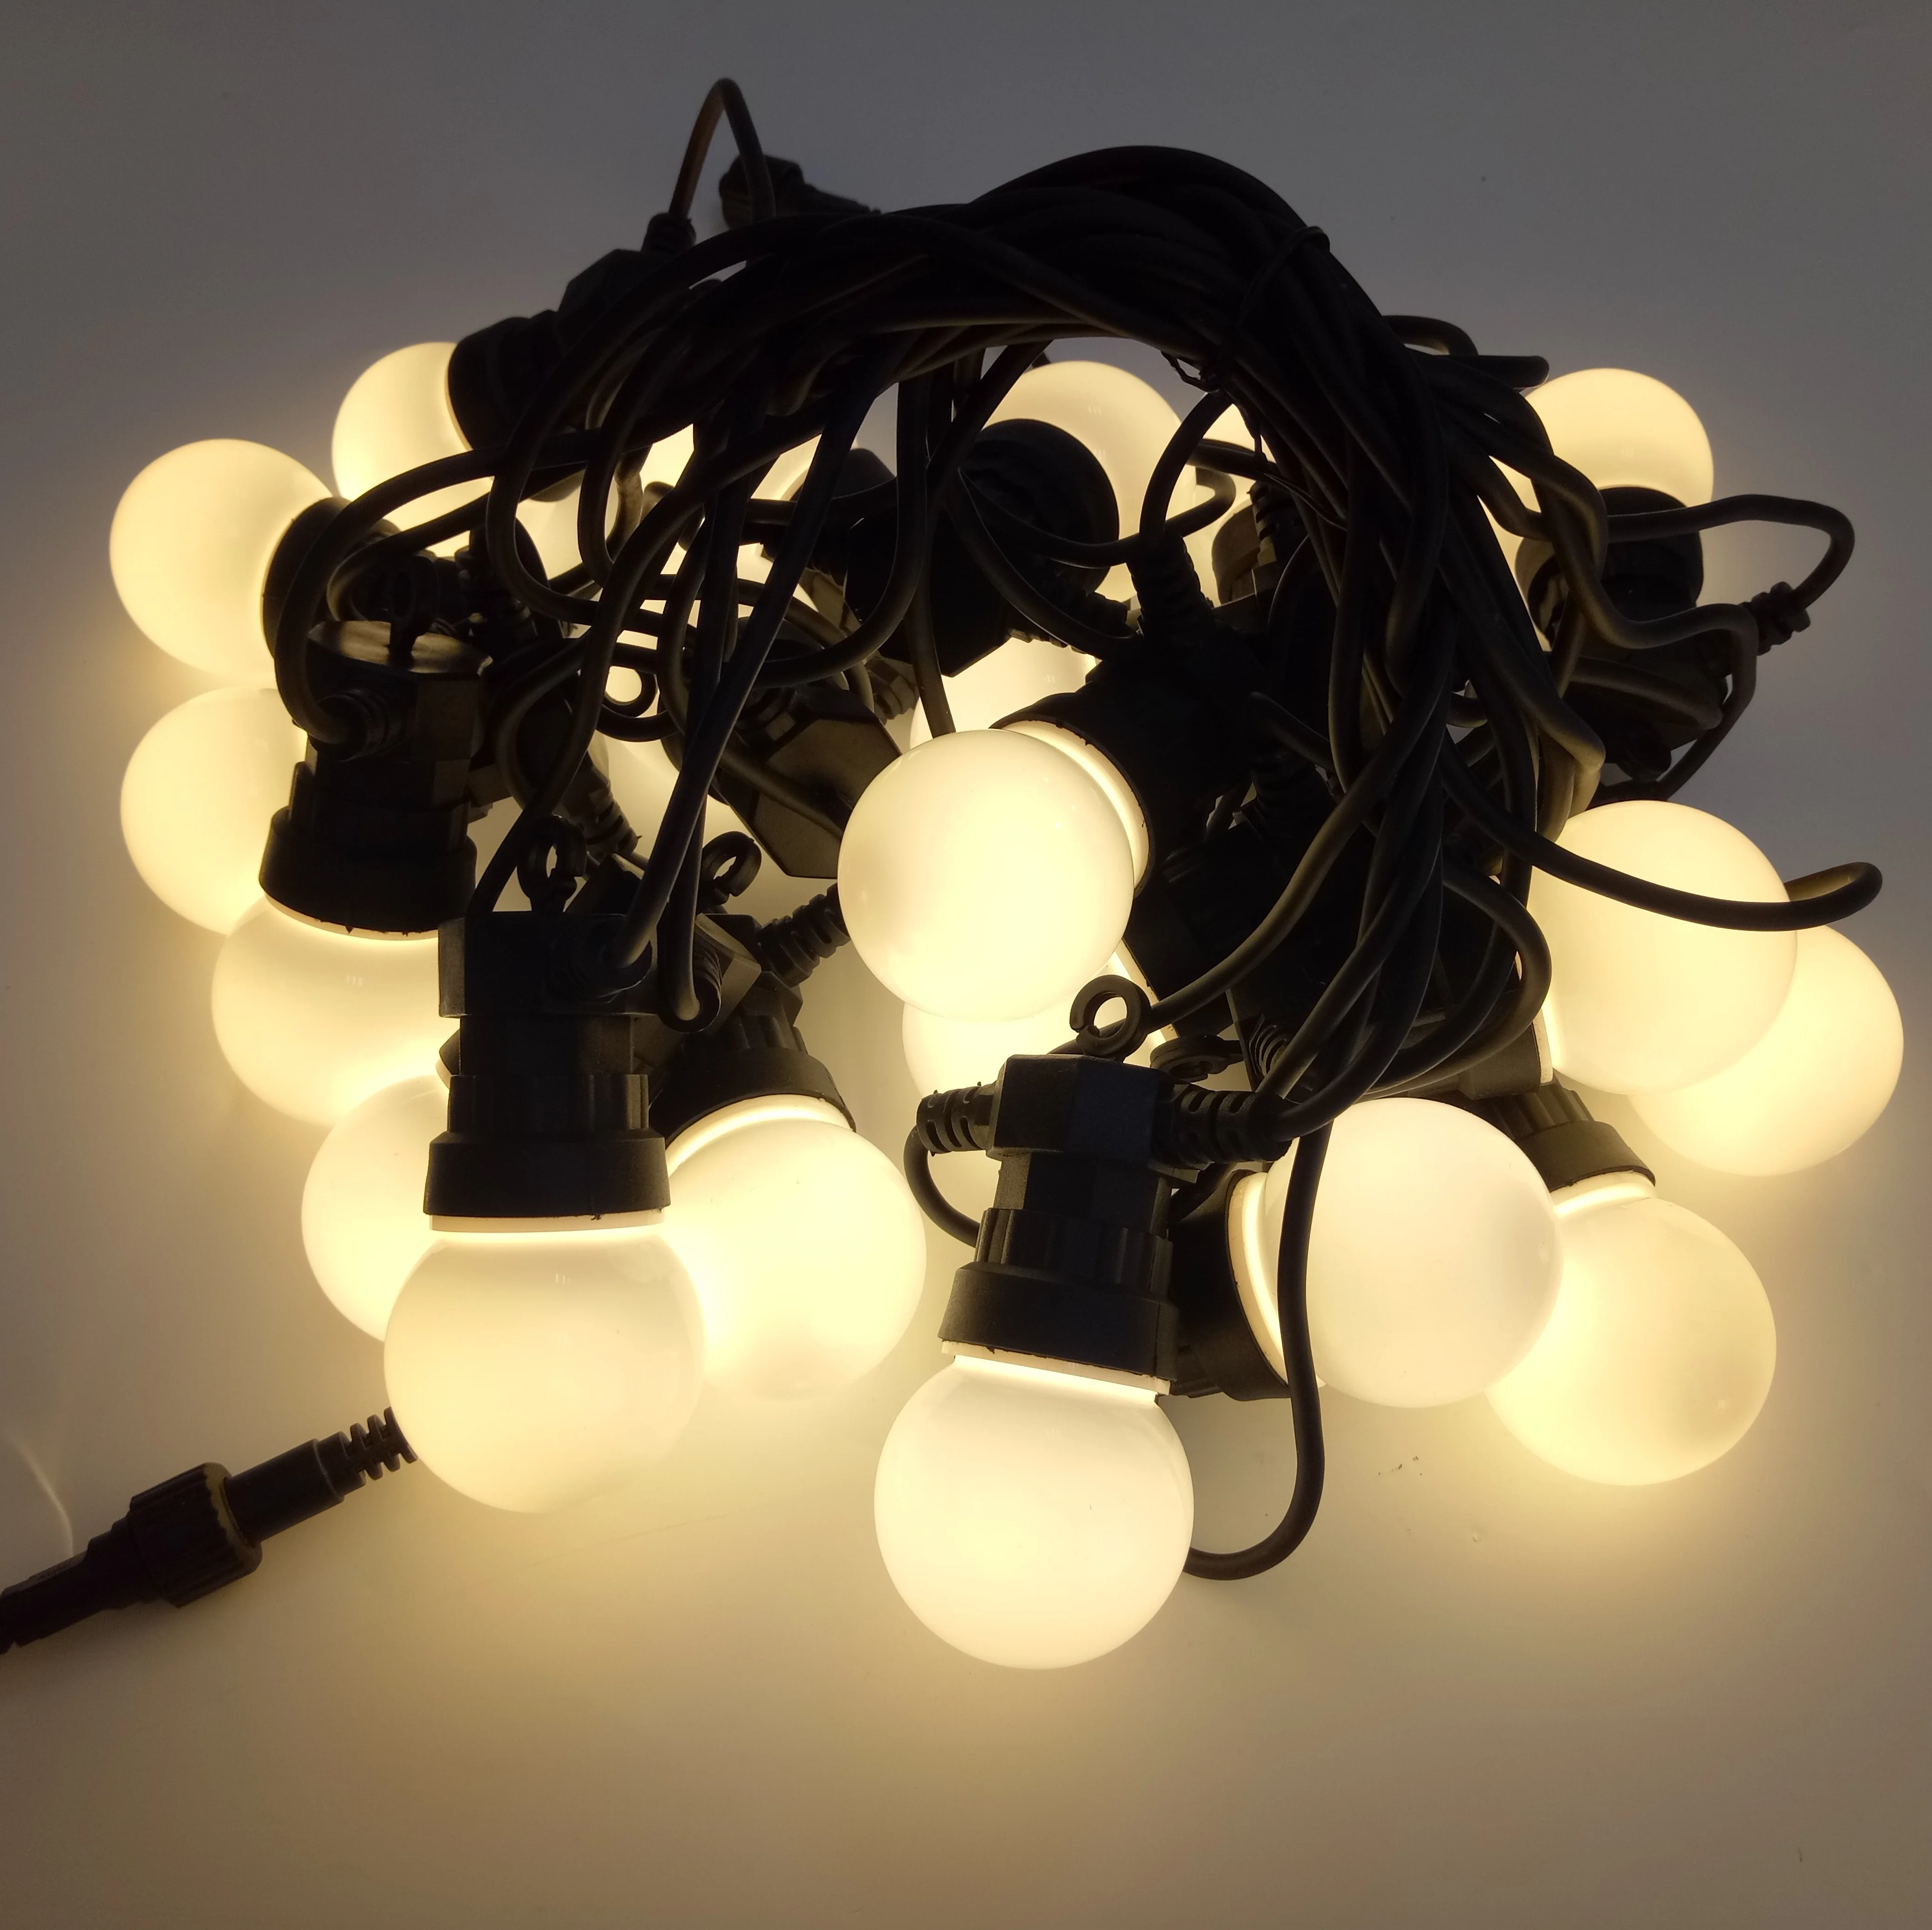 Waterproof Highly Durable 20L Garden Patio Lights Warm White G50 Globe 10m Rubber Led Garland String Light For Outdoor Party